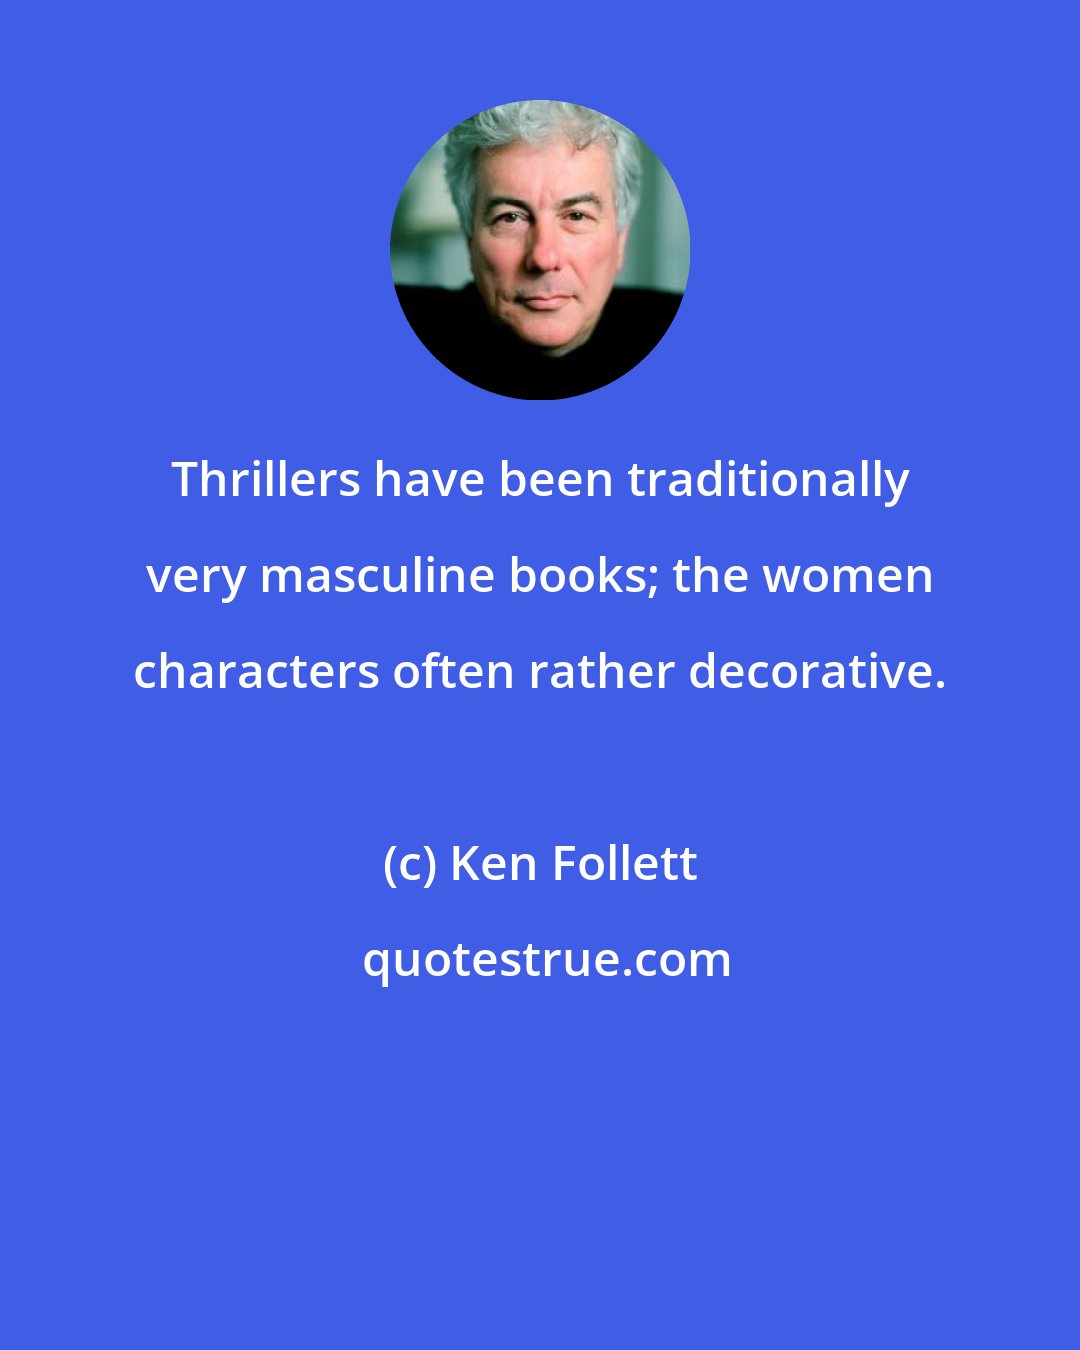 Ken Follett: Thrillers have been traditionally very masculine books; the women characters often rather decorative.